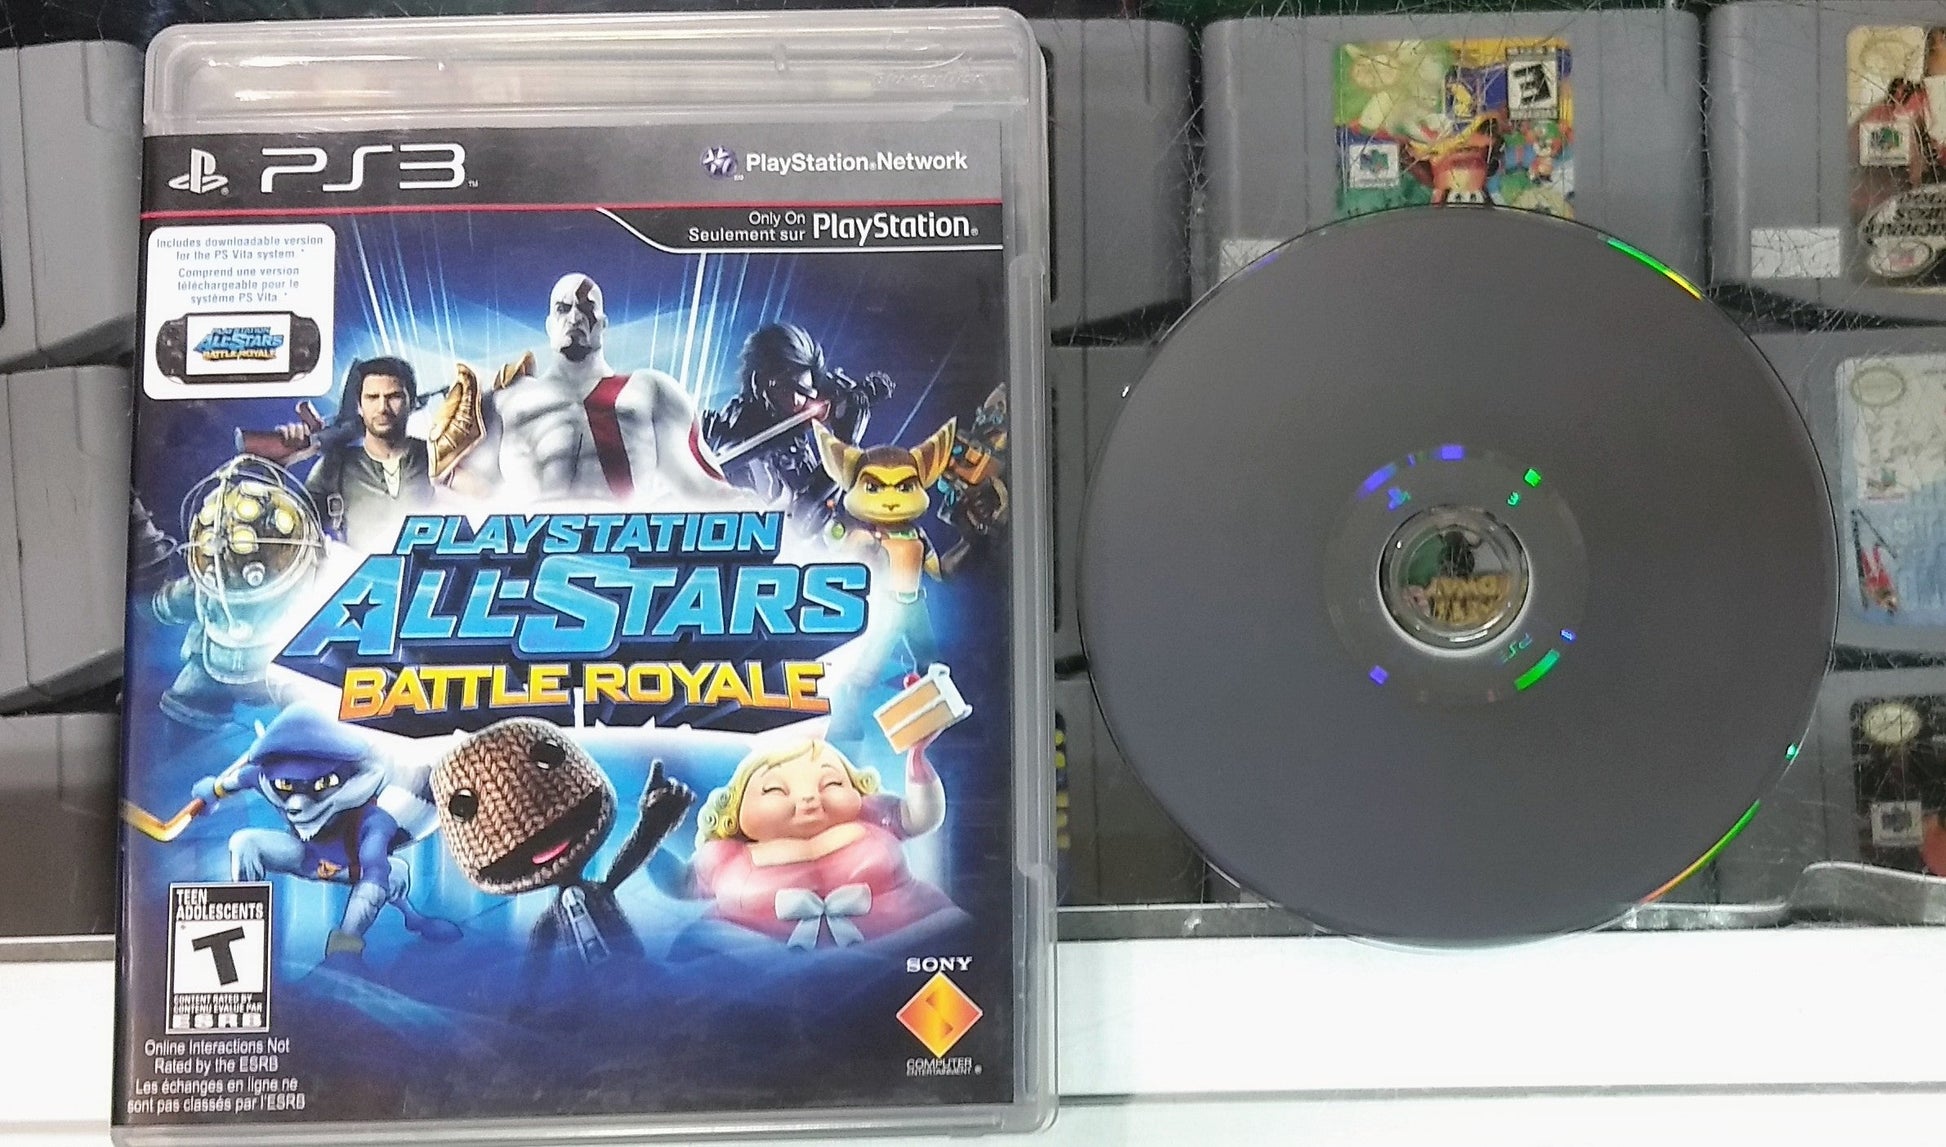 PLAYSTATION ALL-STARS BATTLE ROYALE PLAYSTATION 3 PS3 - jeux video game-x